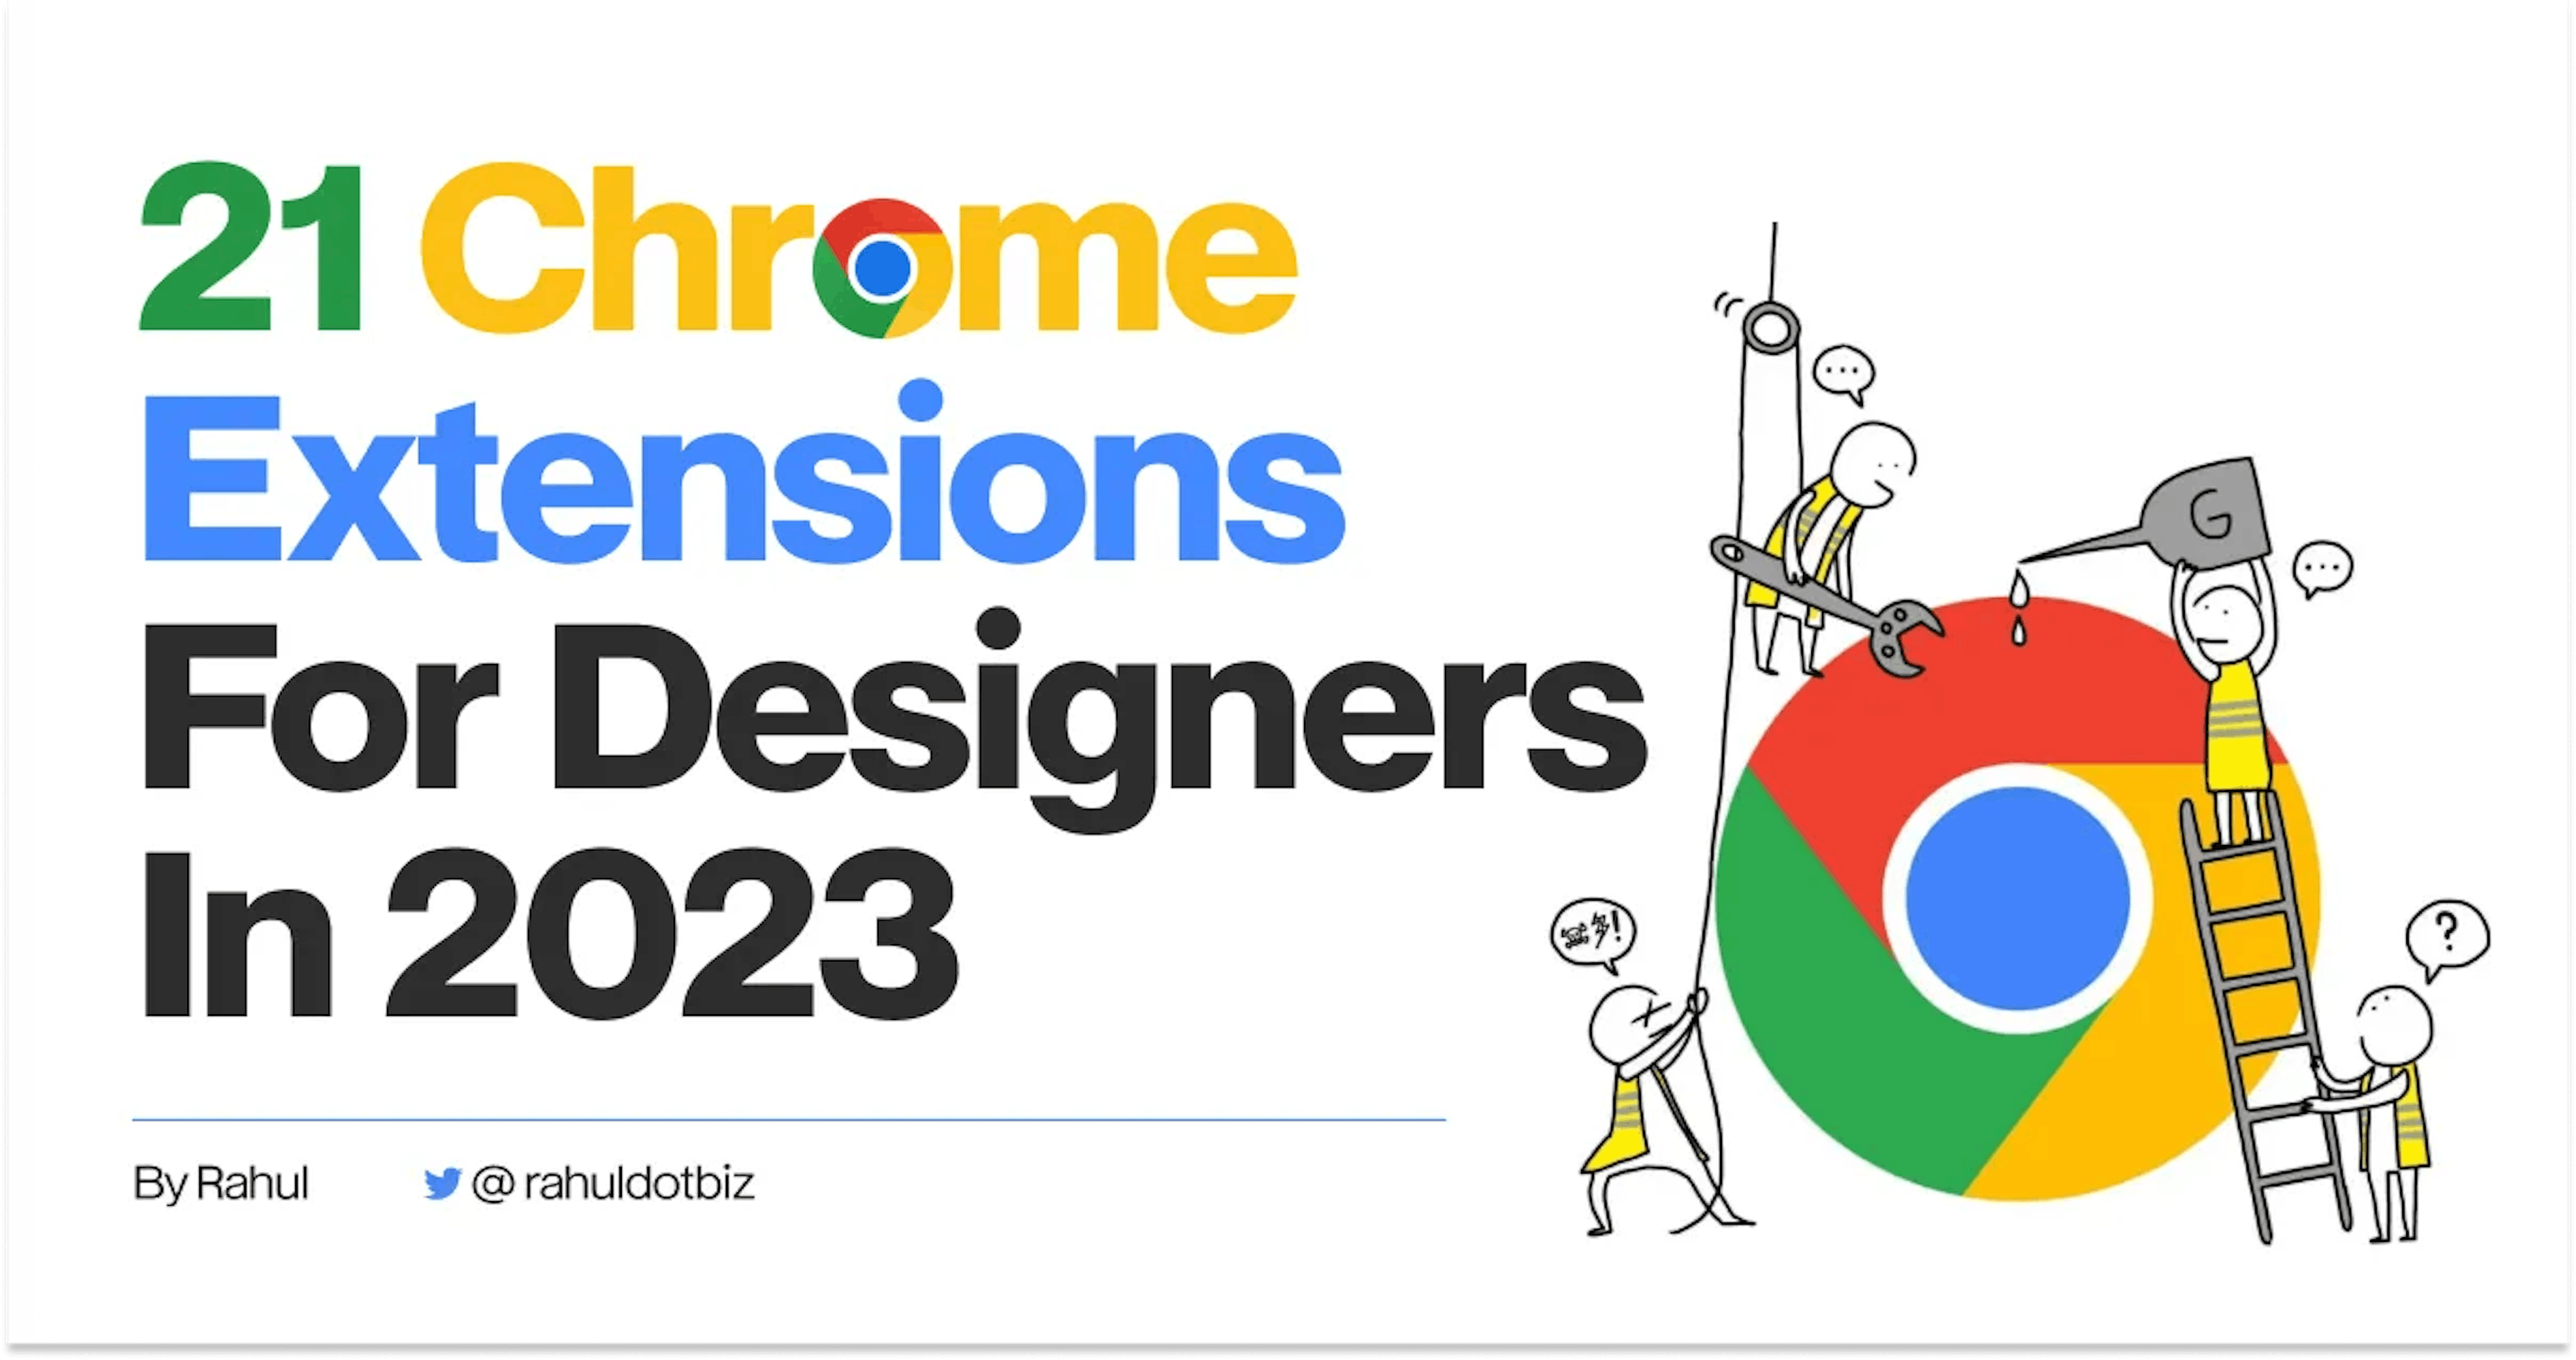 featured image - Top 21 Chrome Extensions for Designers and Developers in 2023